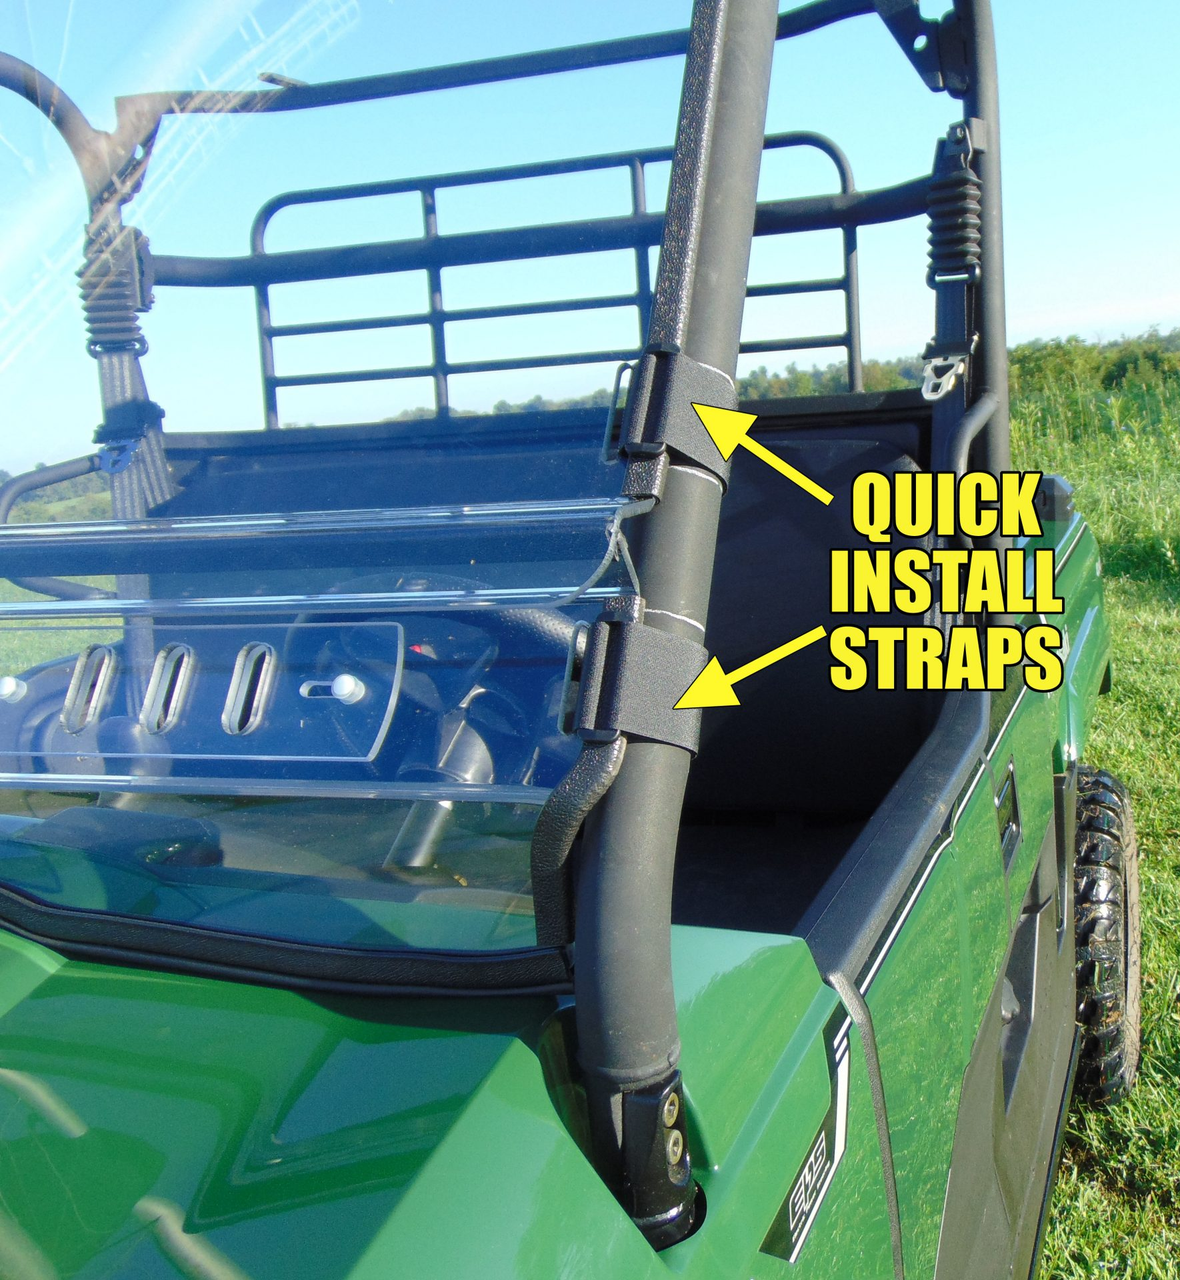 3 Star Kawasaki Mule Pro FX/DX two piece polycarbonate windshield with optional scratch resistance and quick install straps